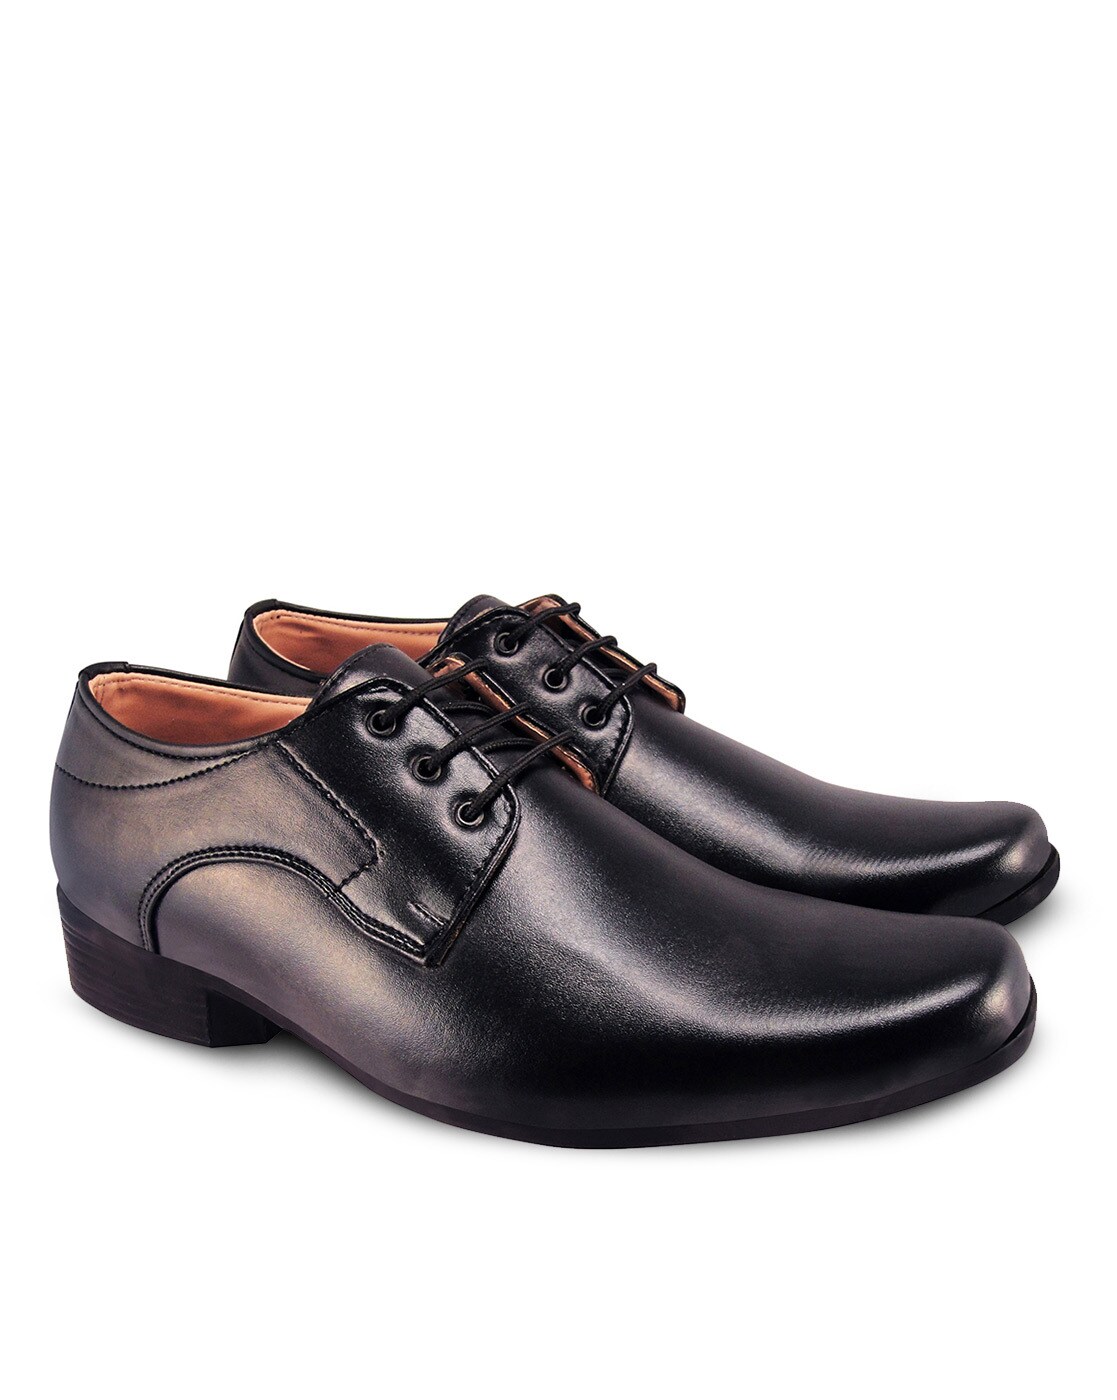 square toe derby shoes